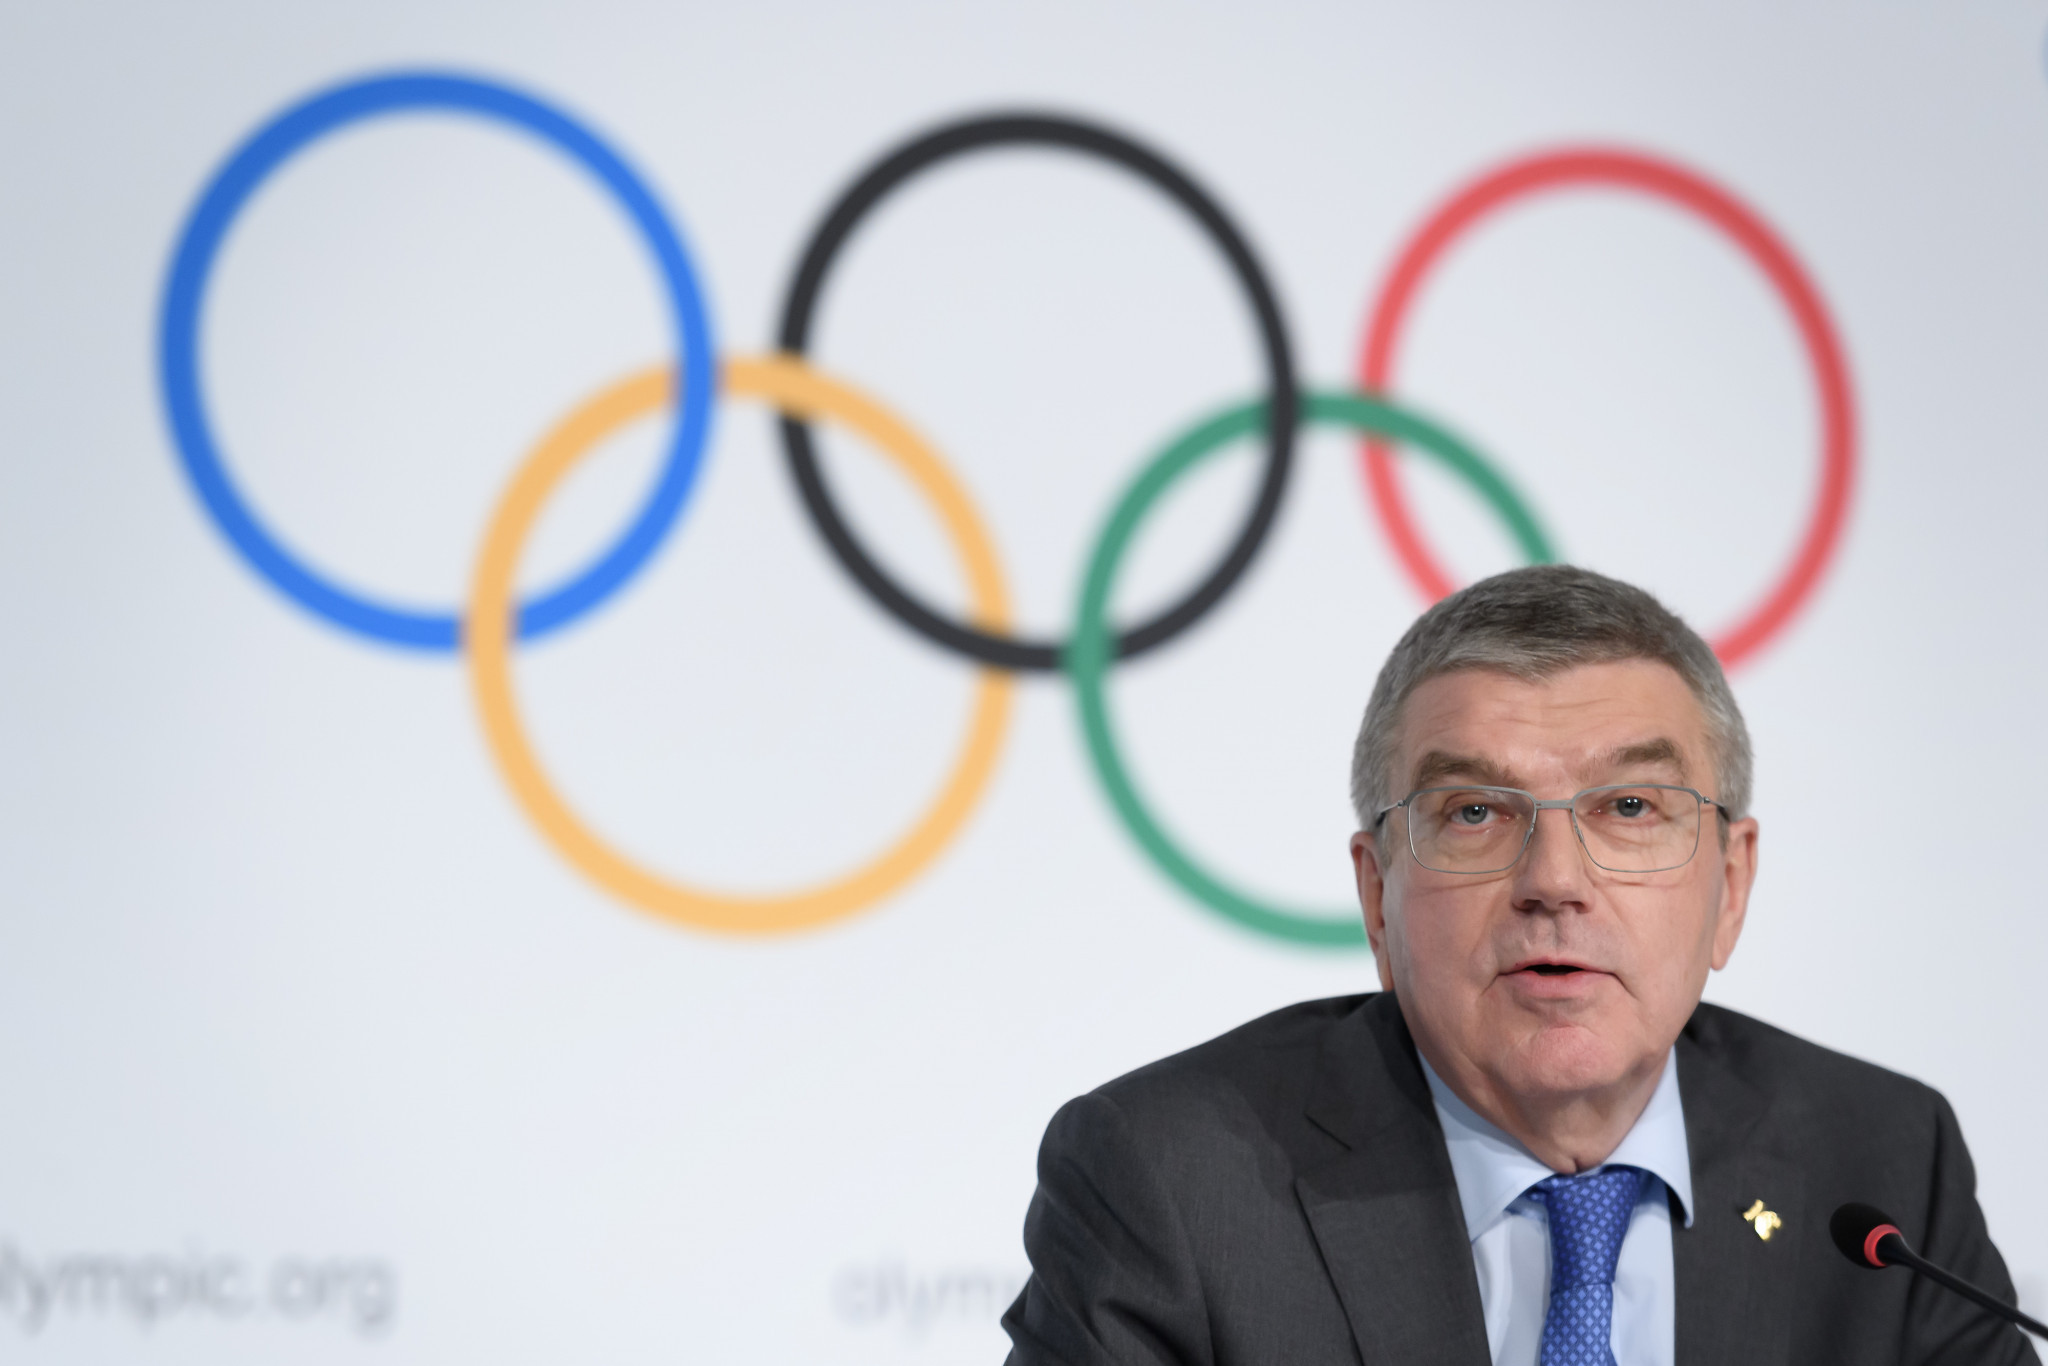 IOC President Thomas Bach warned against podium protests at Tokyo 2020 in his New Year message ©Getty Images